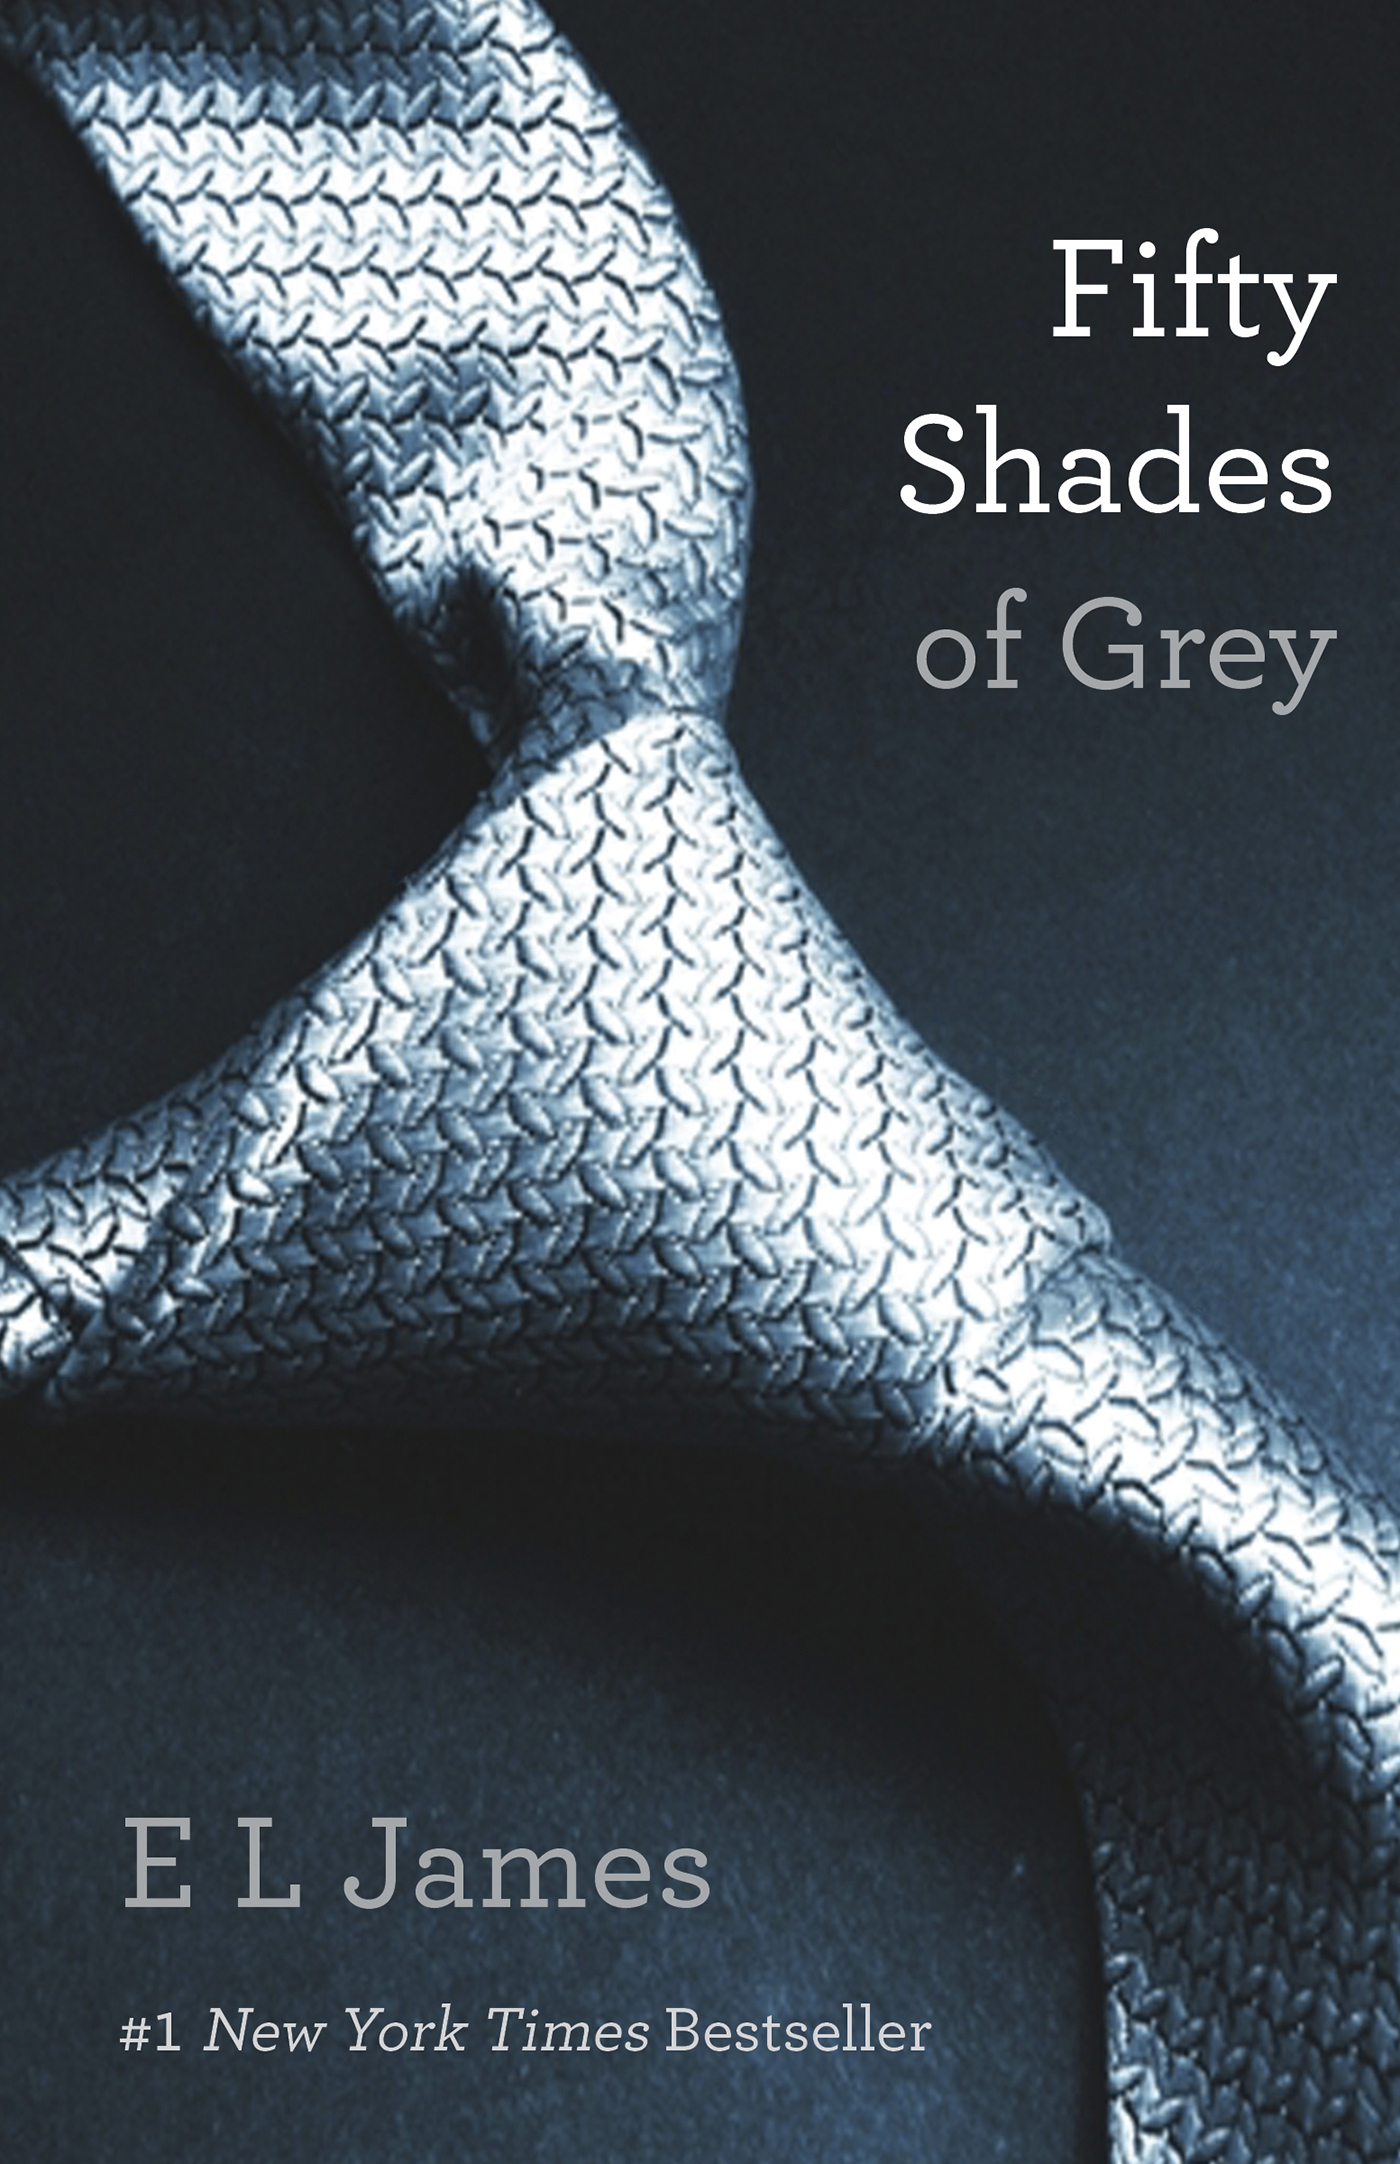 Fifty shades of grey book one of the fifty shades trilogy cover image